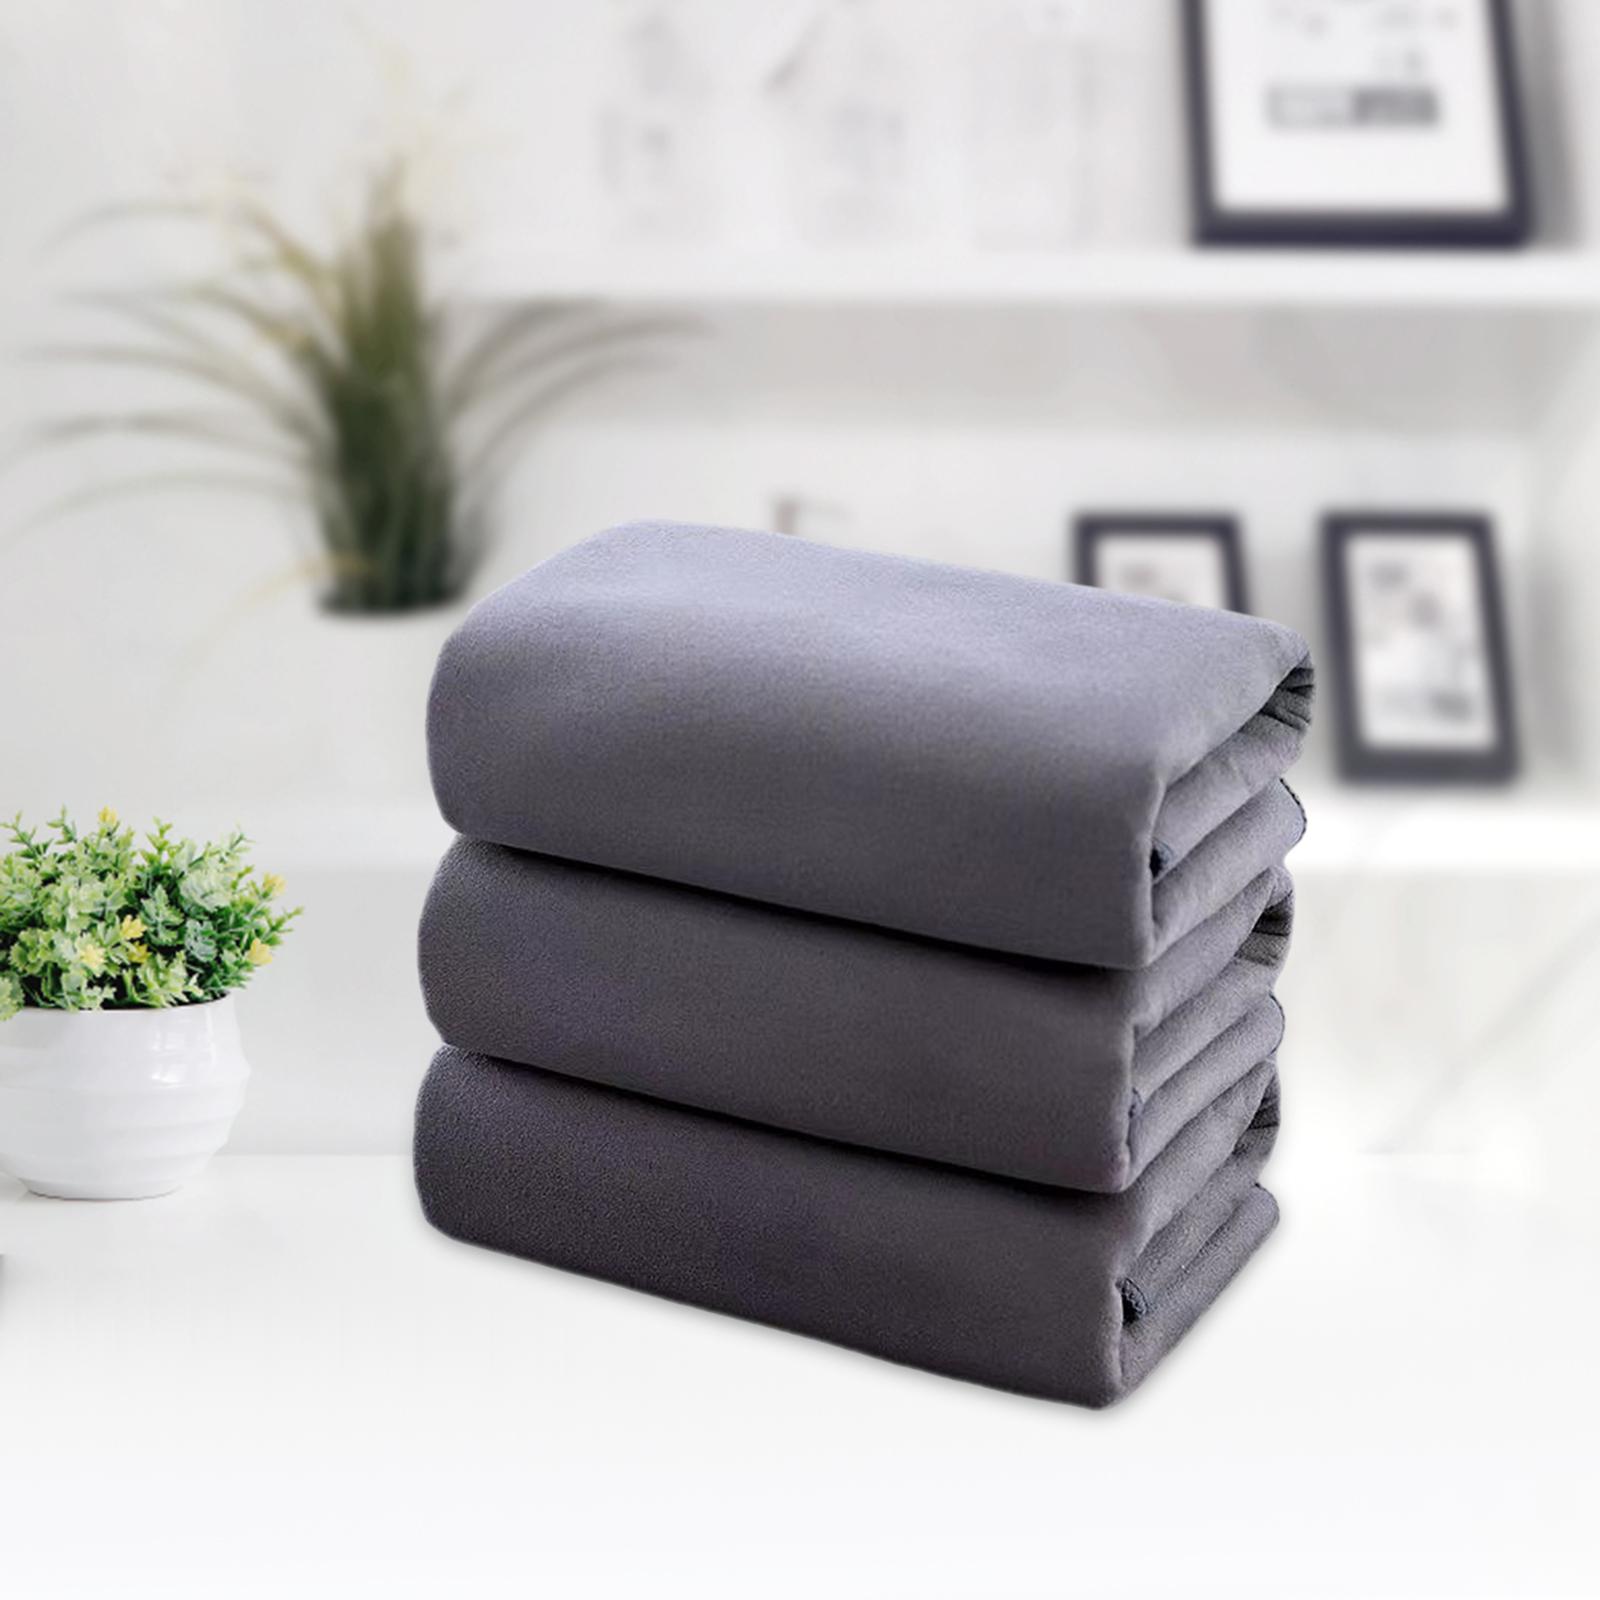 Car Drying Towel Microfiber Cloth 12x23.6inch Washable for Home Kitchen 3 Pieces